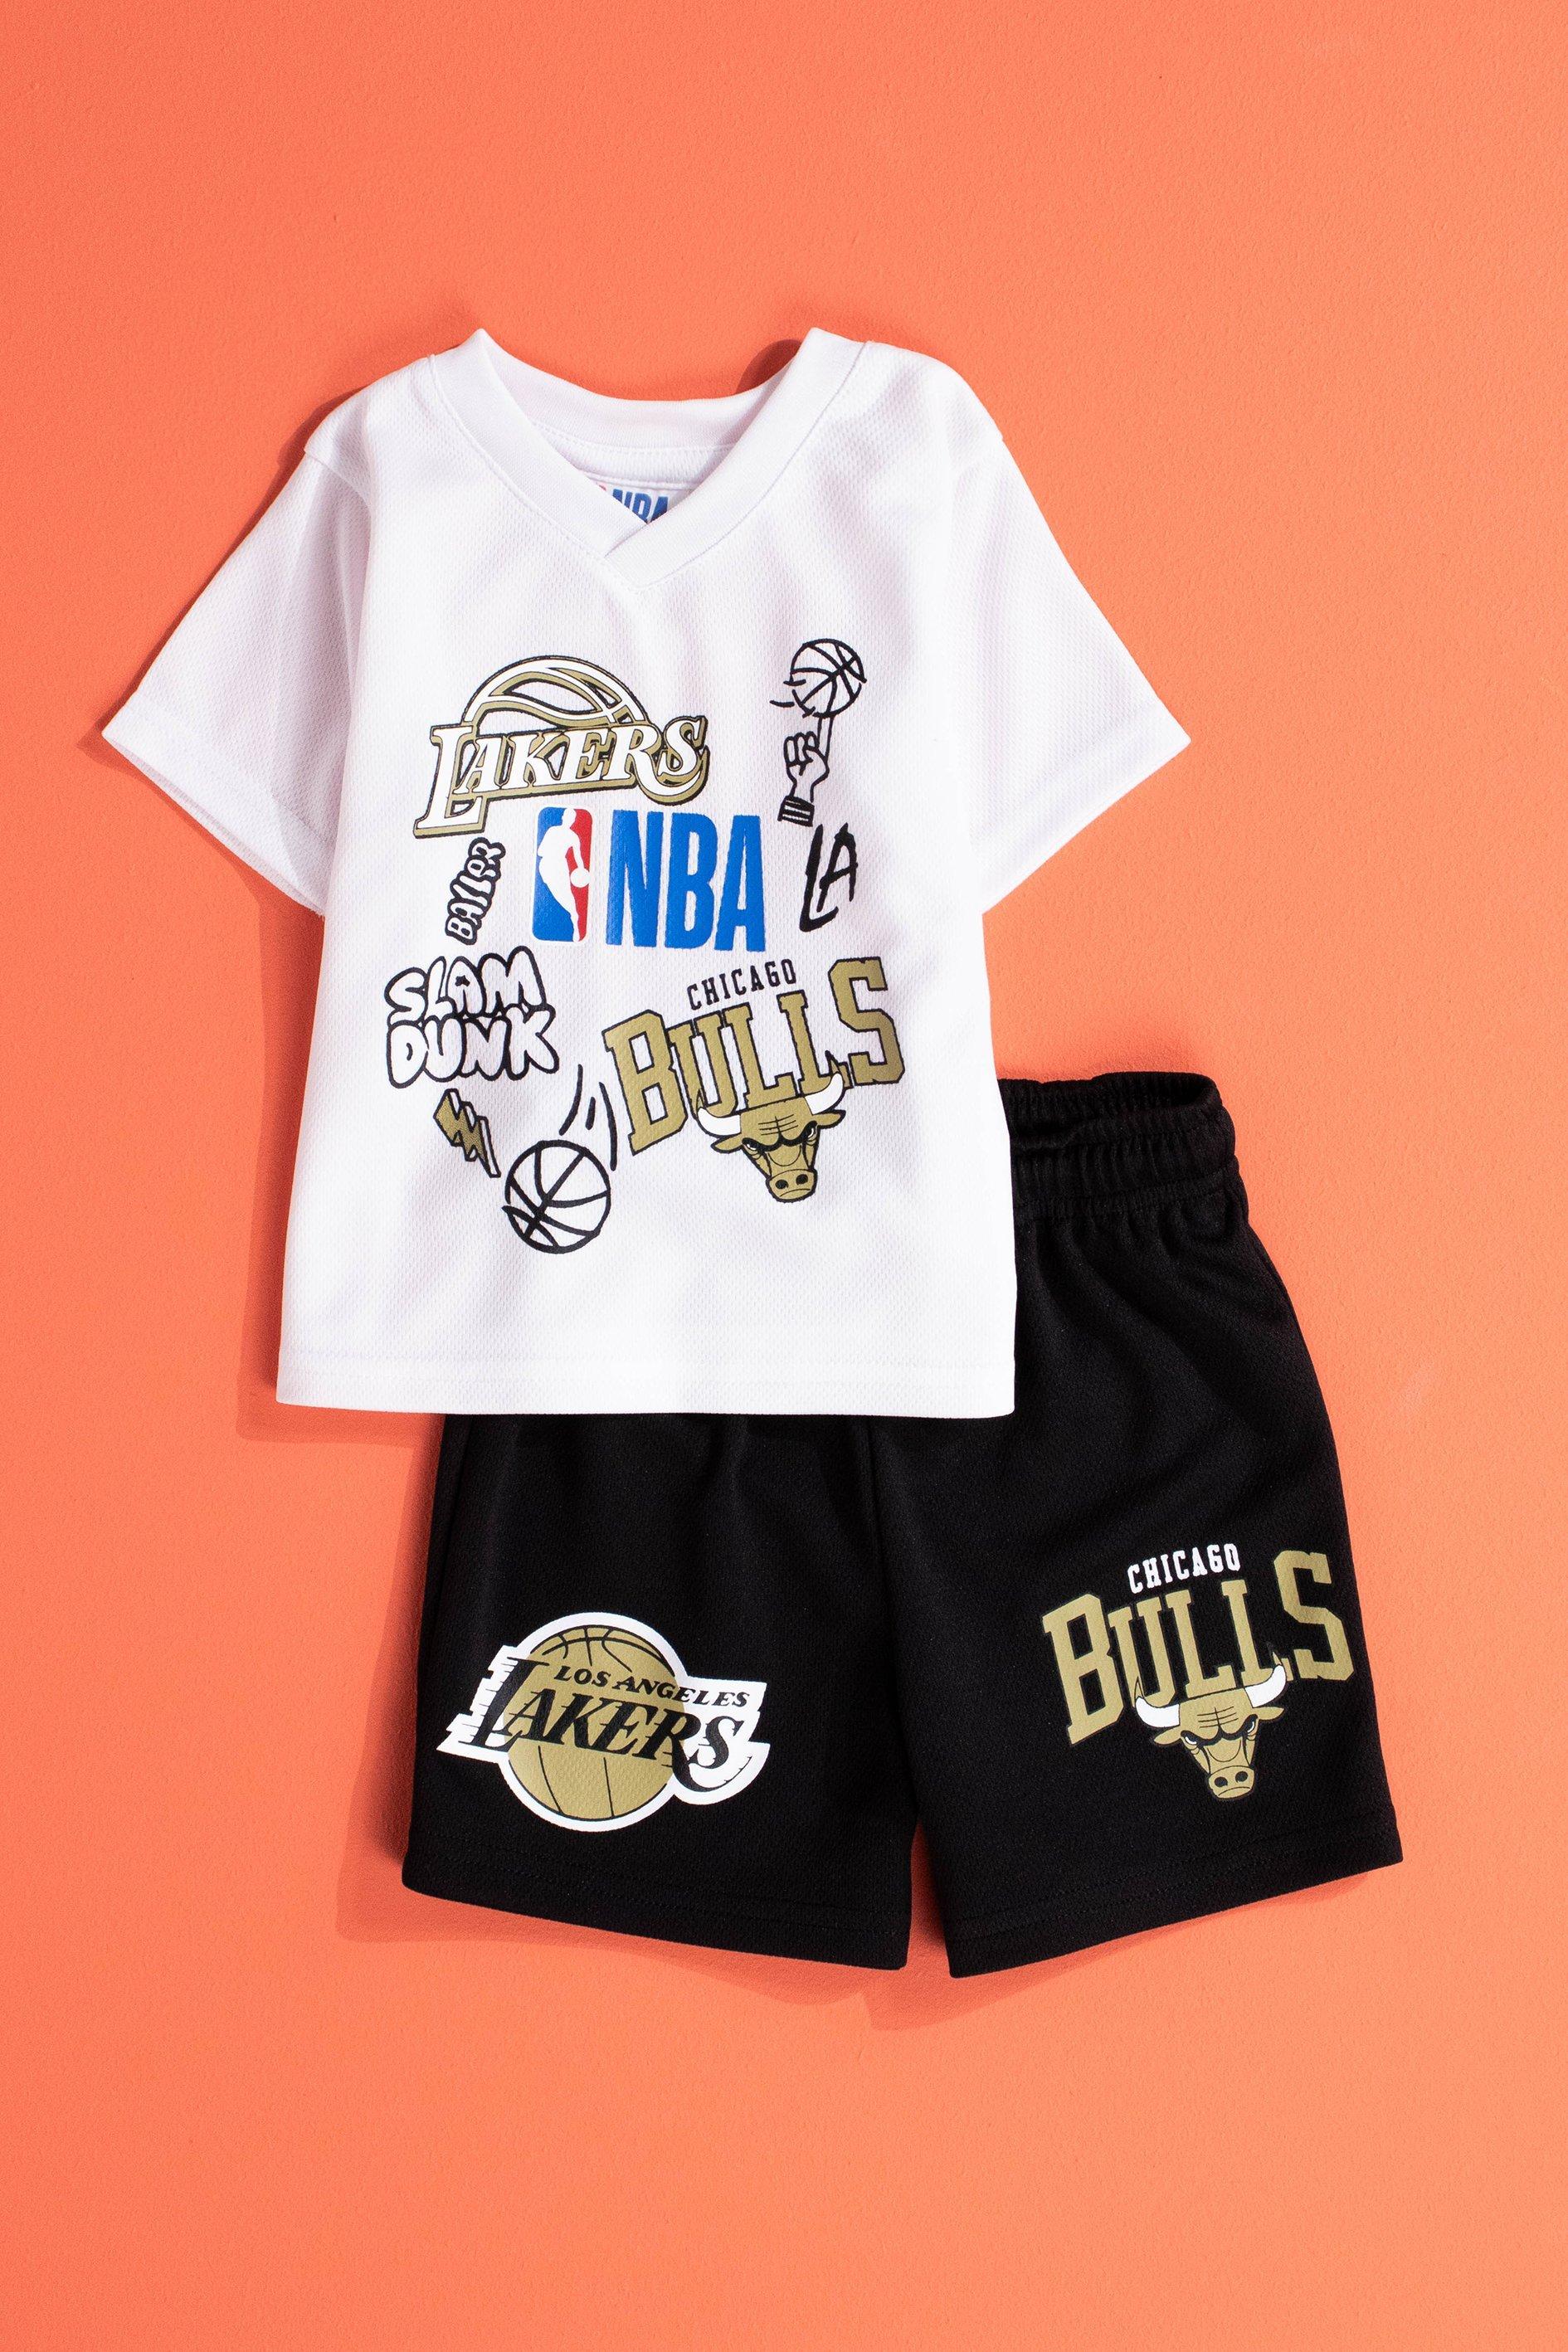 NBA Style, Chicago Bulls and Lakers Clothes